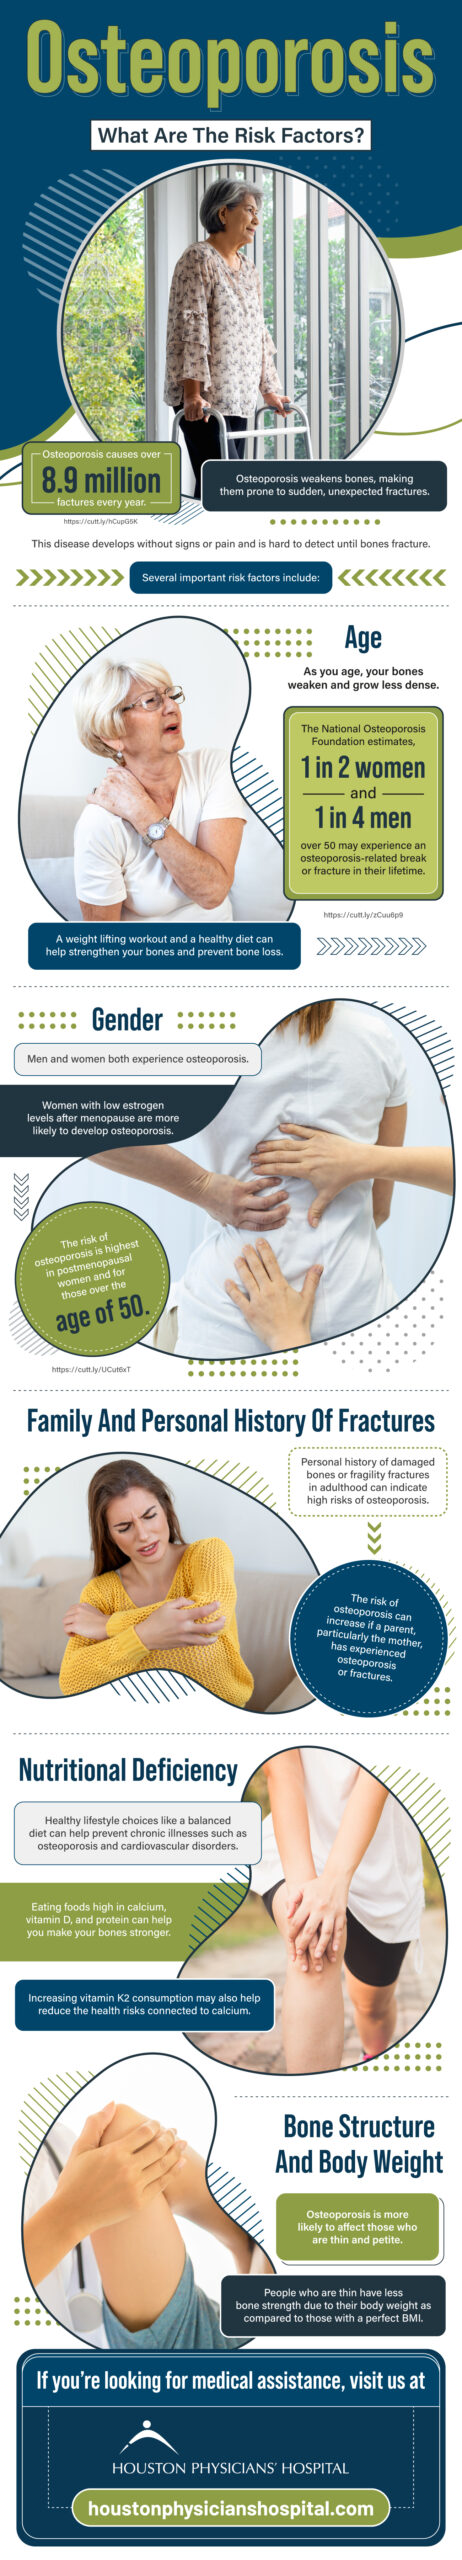 Osteoporosis causes over 8.9 million fractures every year.